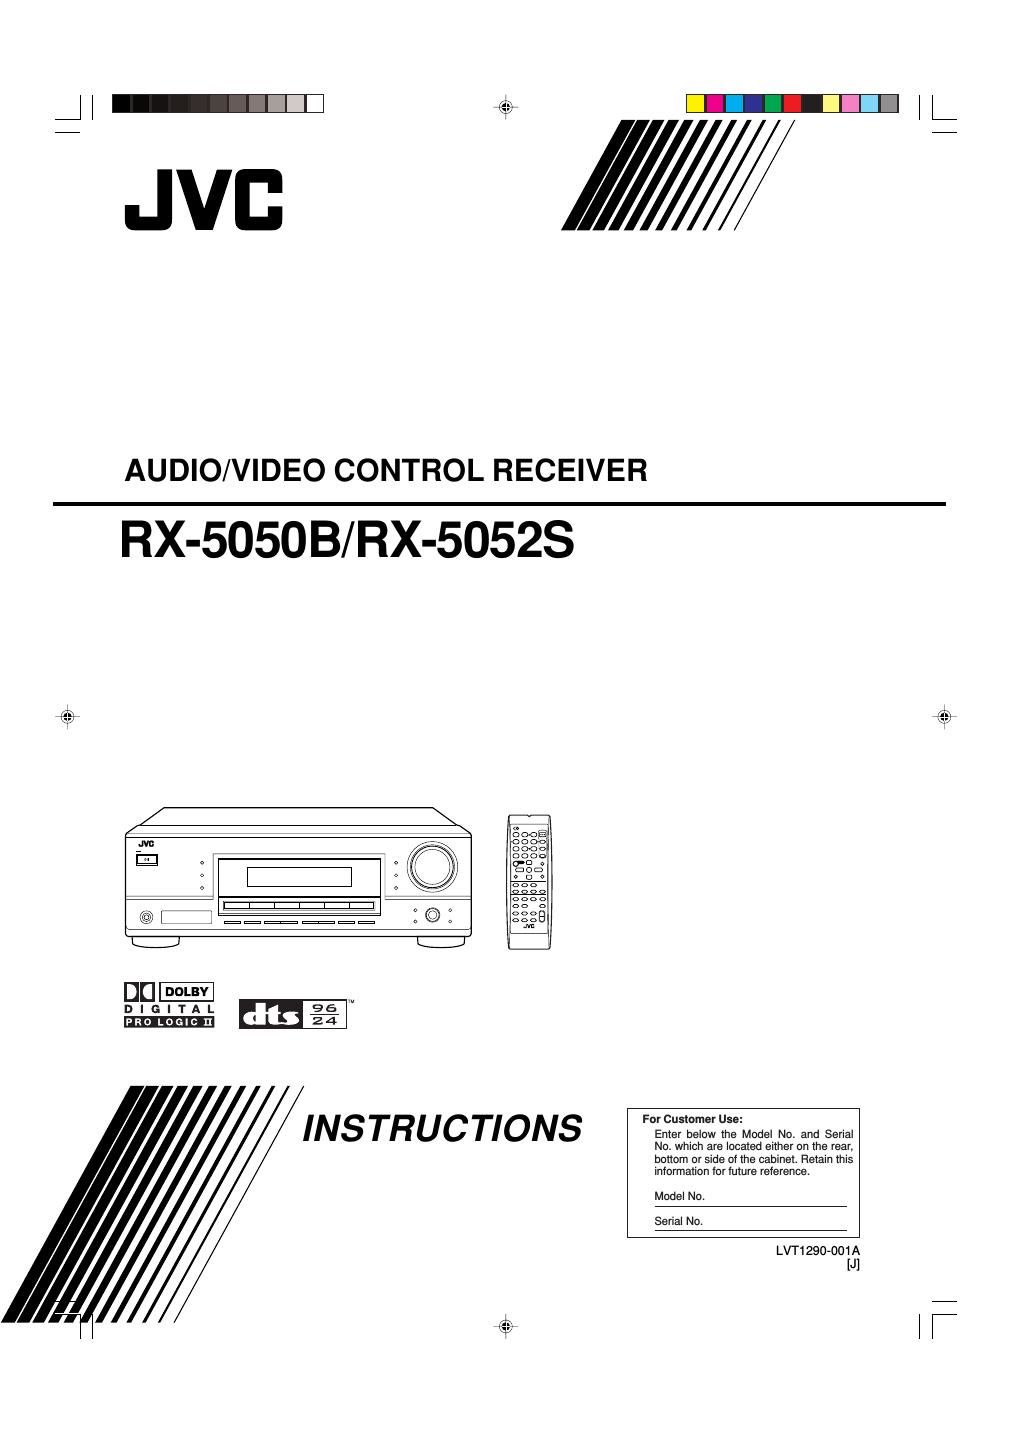 Jvc RX 5052 S Owners Manual